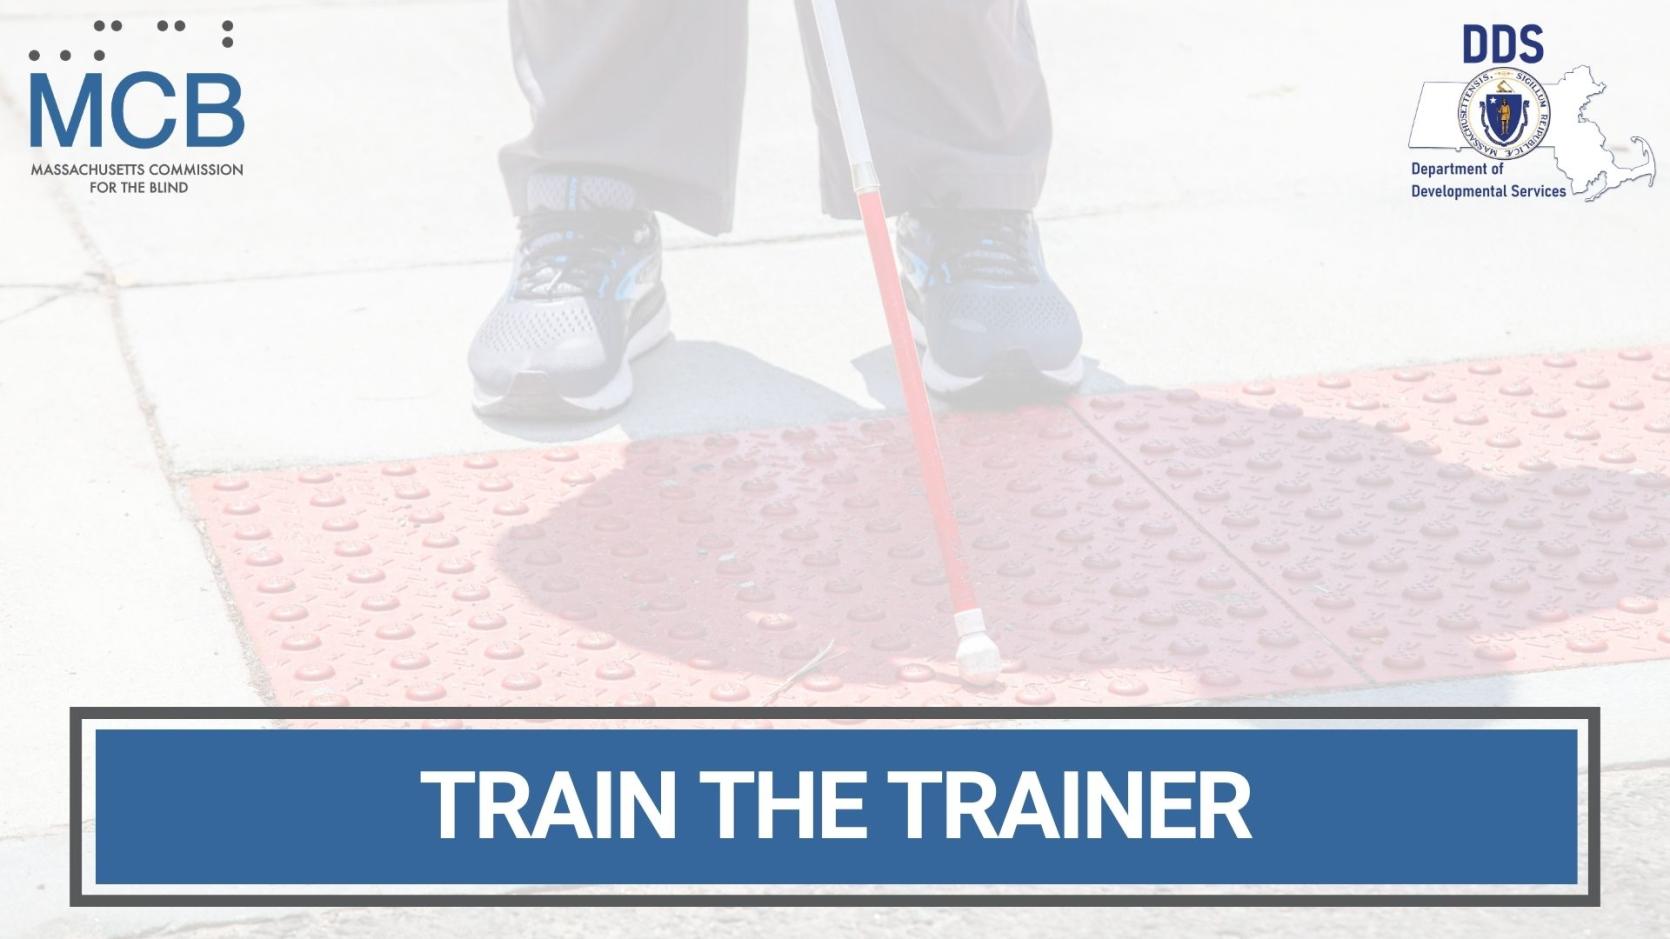 A photo of a white cane with the Commission for the Blind and Department of Developmental Services logos and the text: Train the Trainer